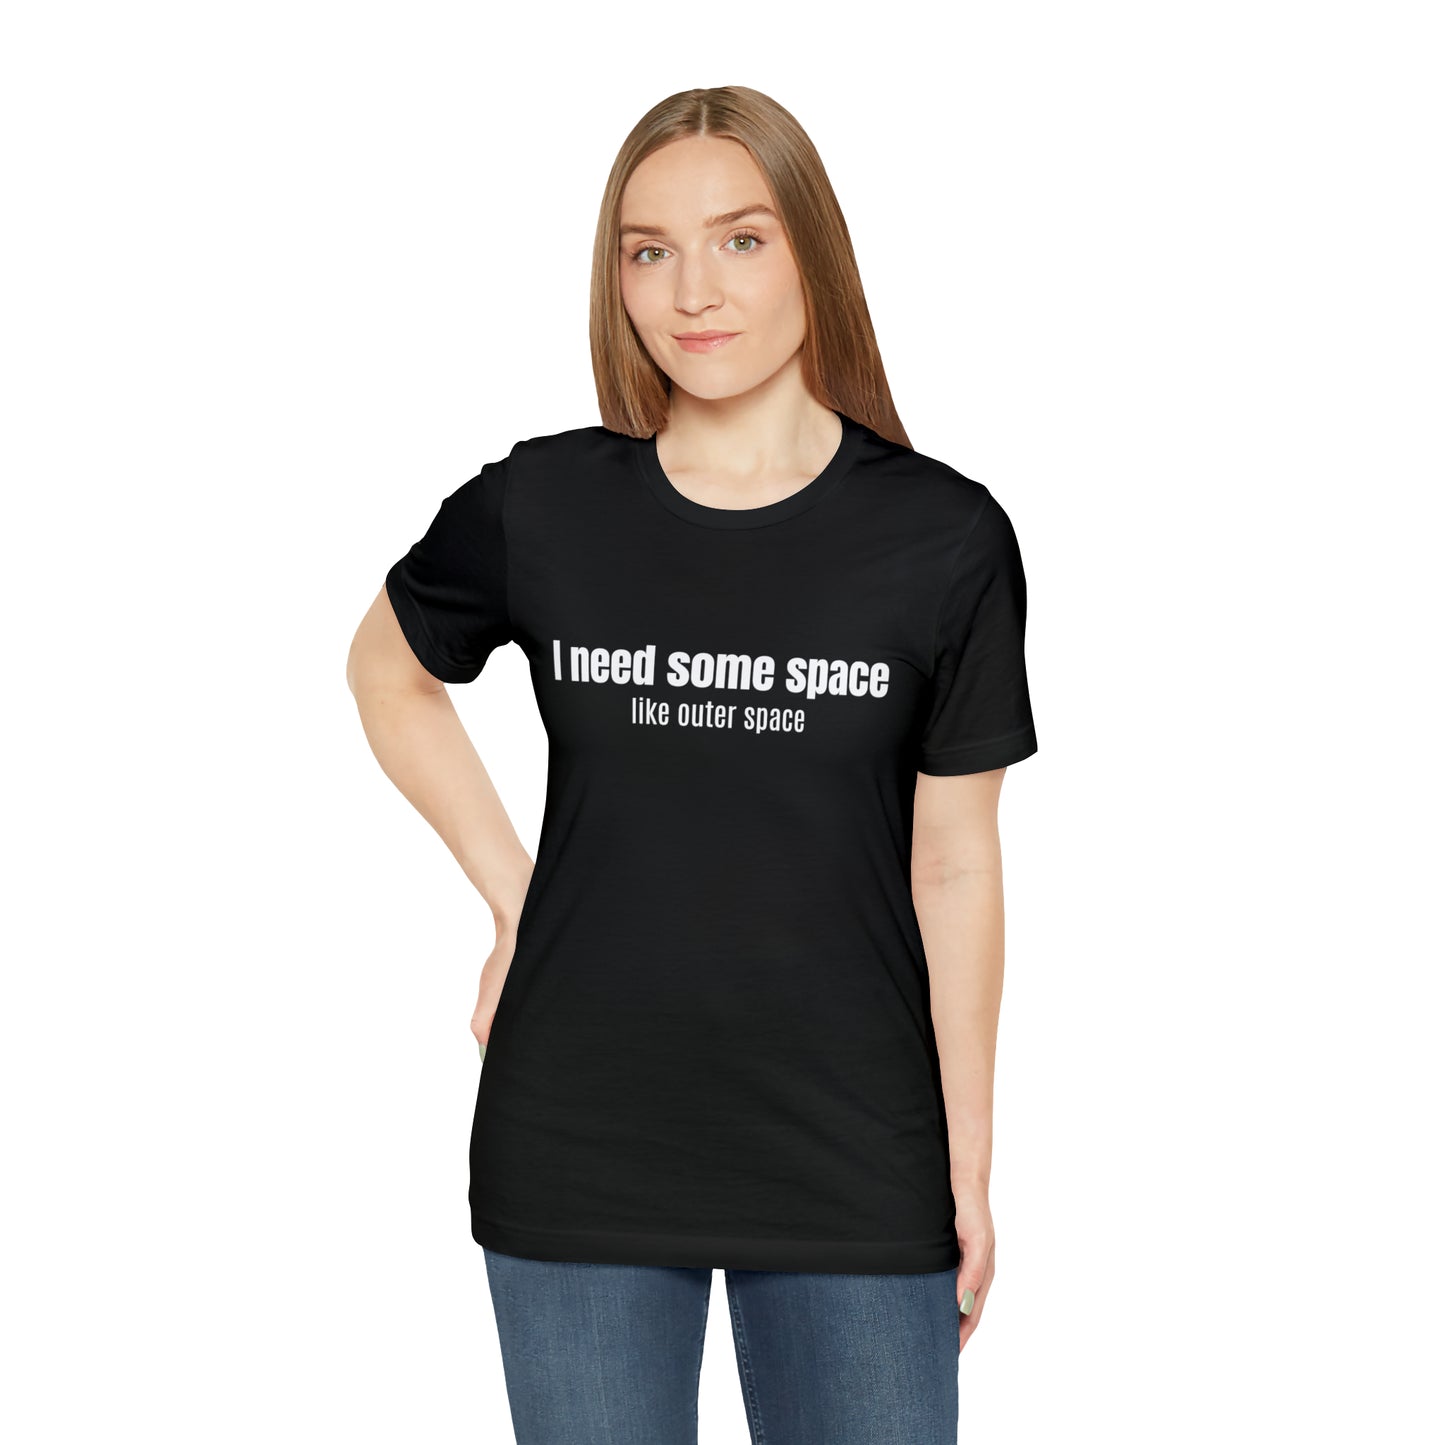 Short Sleeve Tee Shirt - I need some space - like outer space